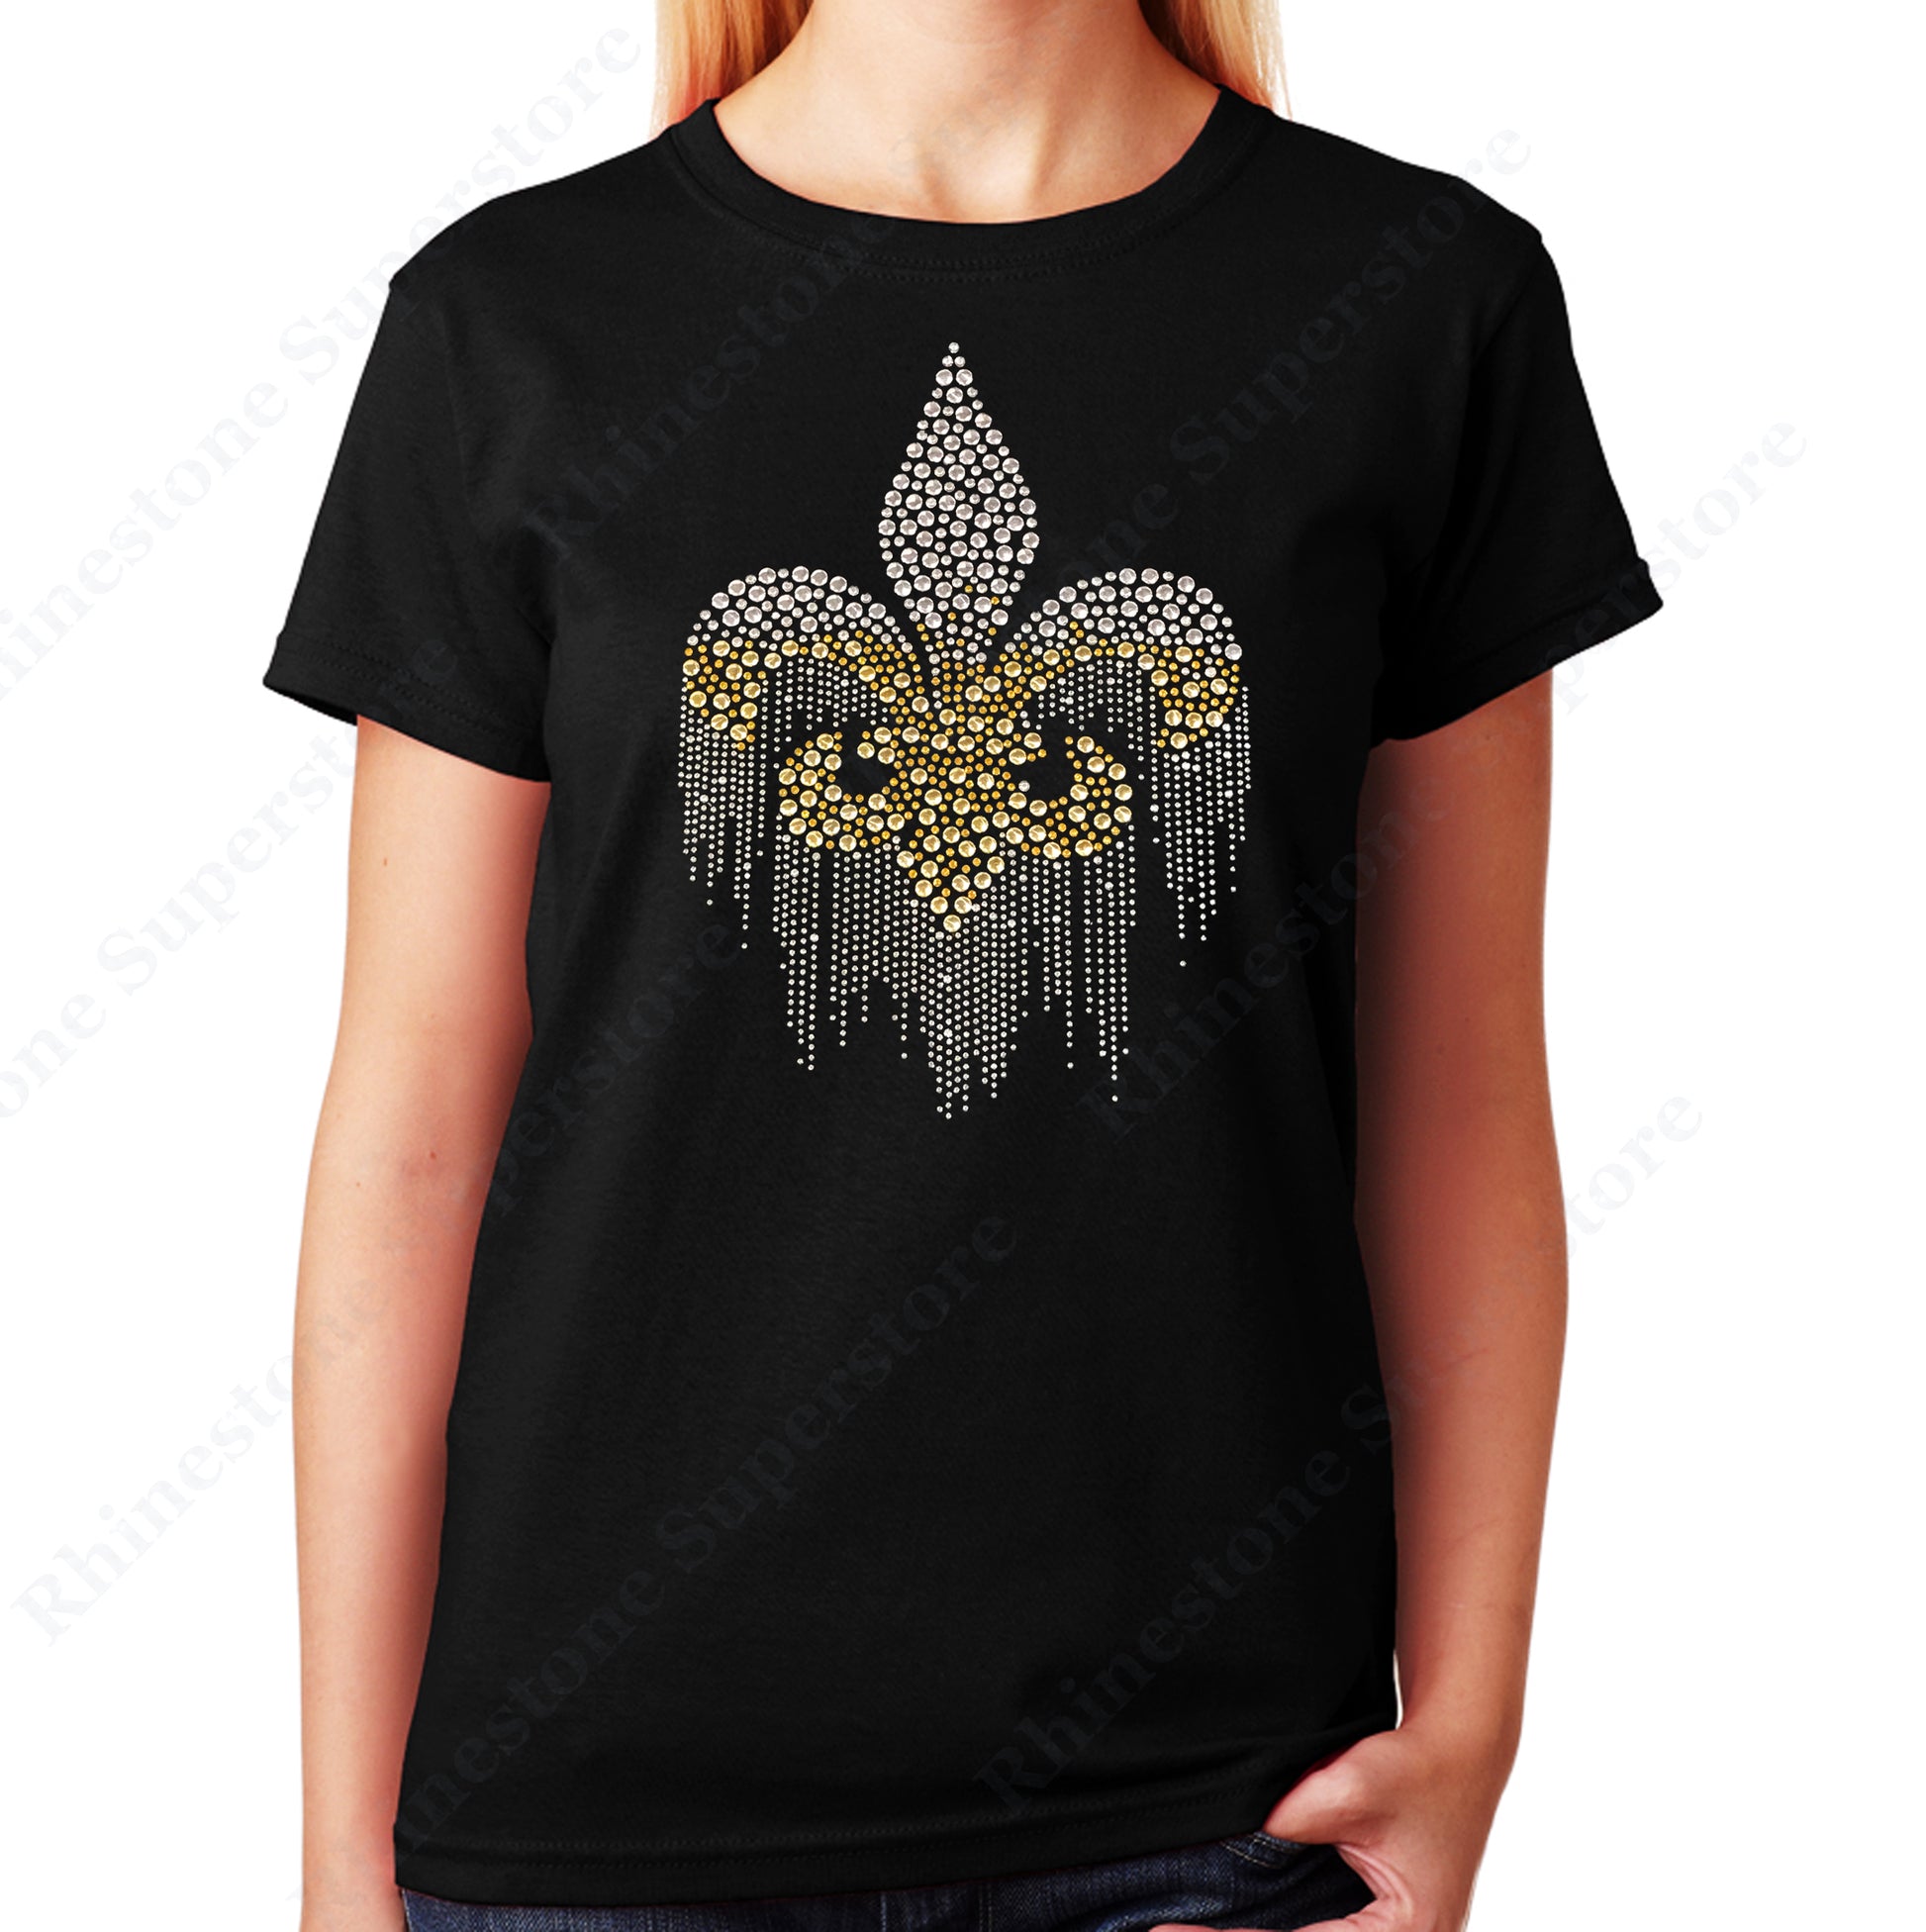 Unisex T-Shirt with Fluer de Lis Dripping in Silver and Gold Rhinestuds